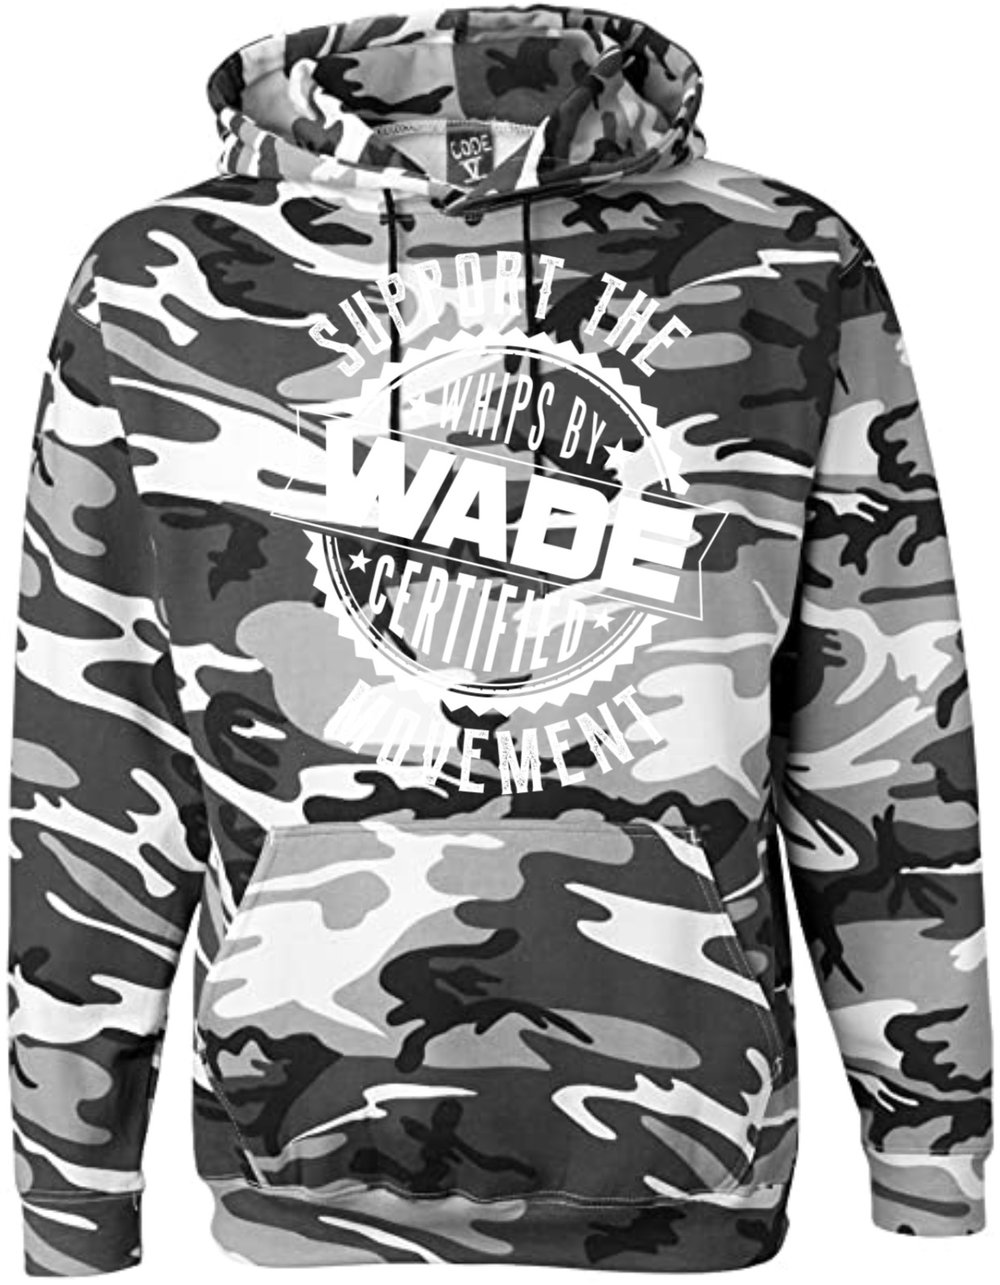 Camo Support The Movement Hoodie : PRE-ORDER